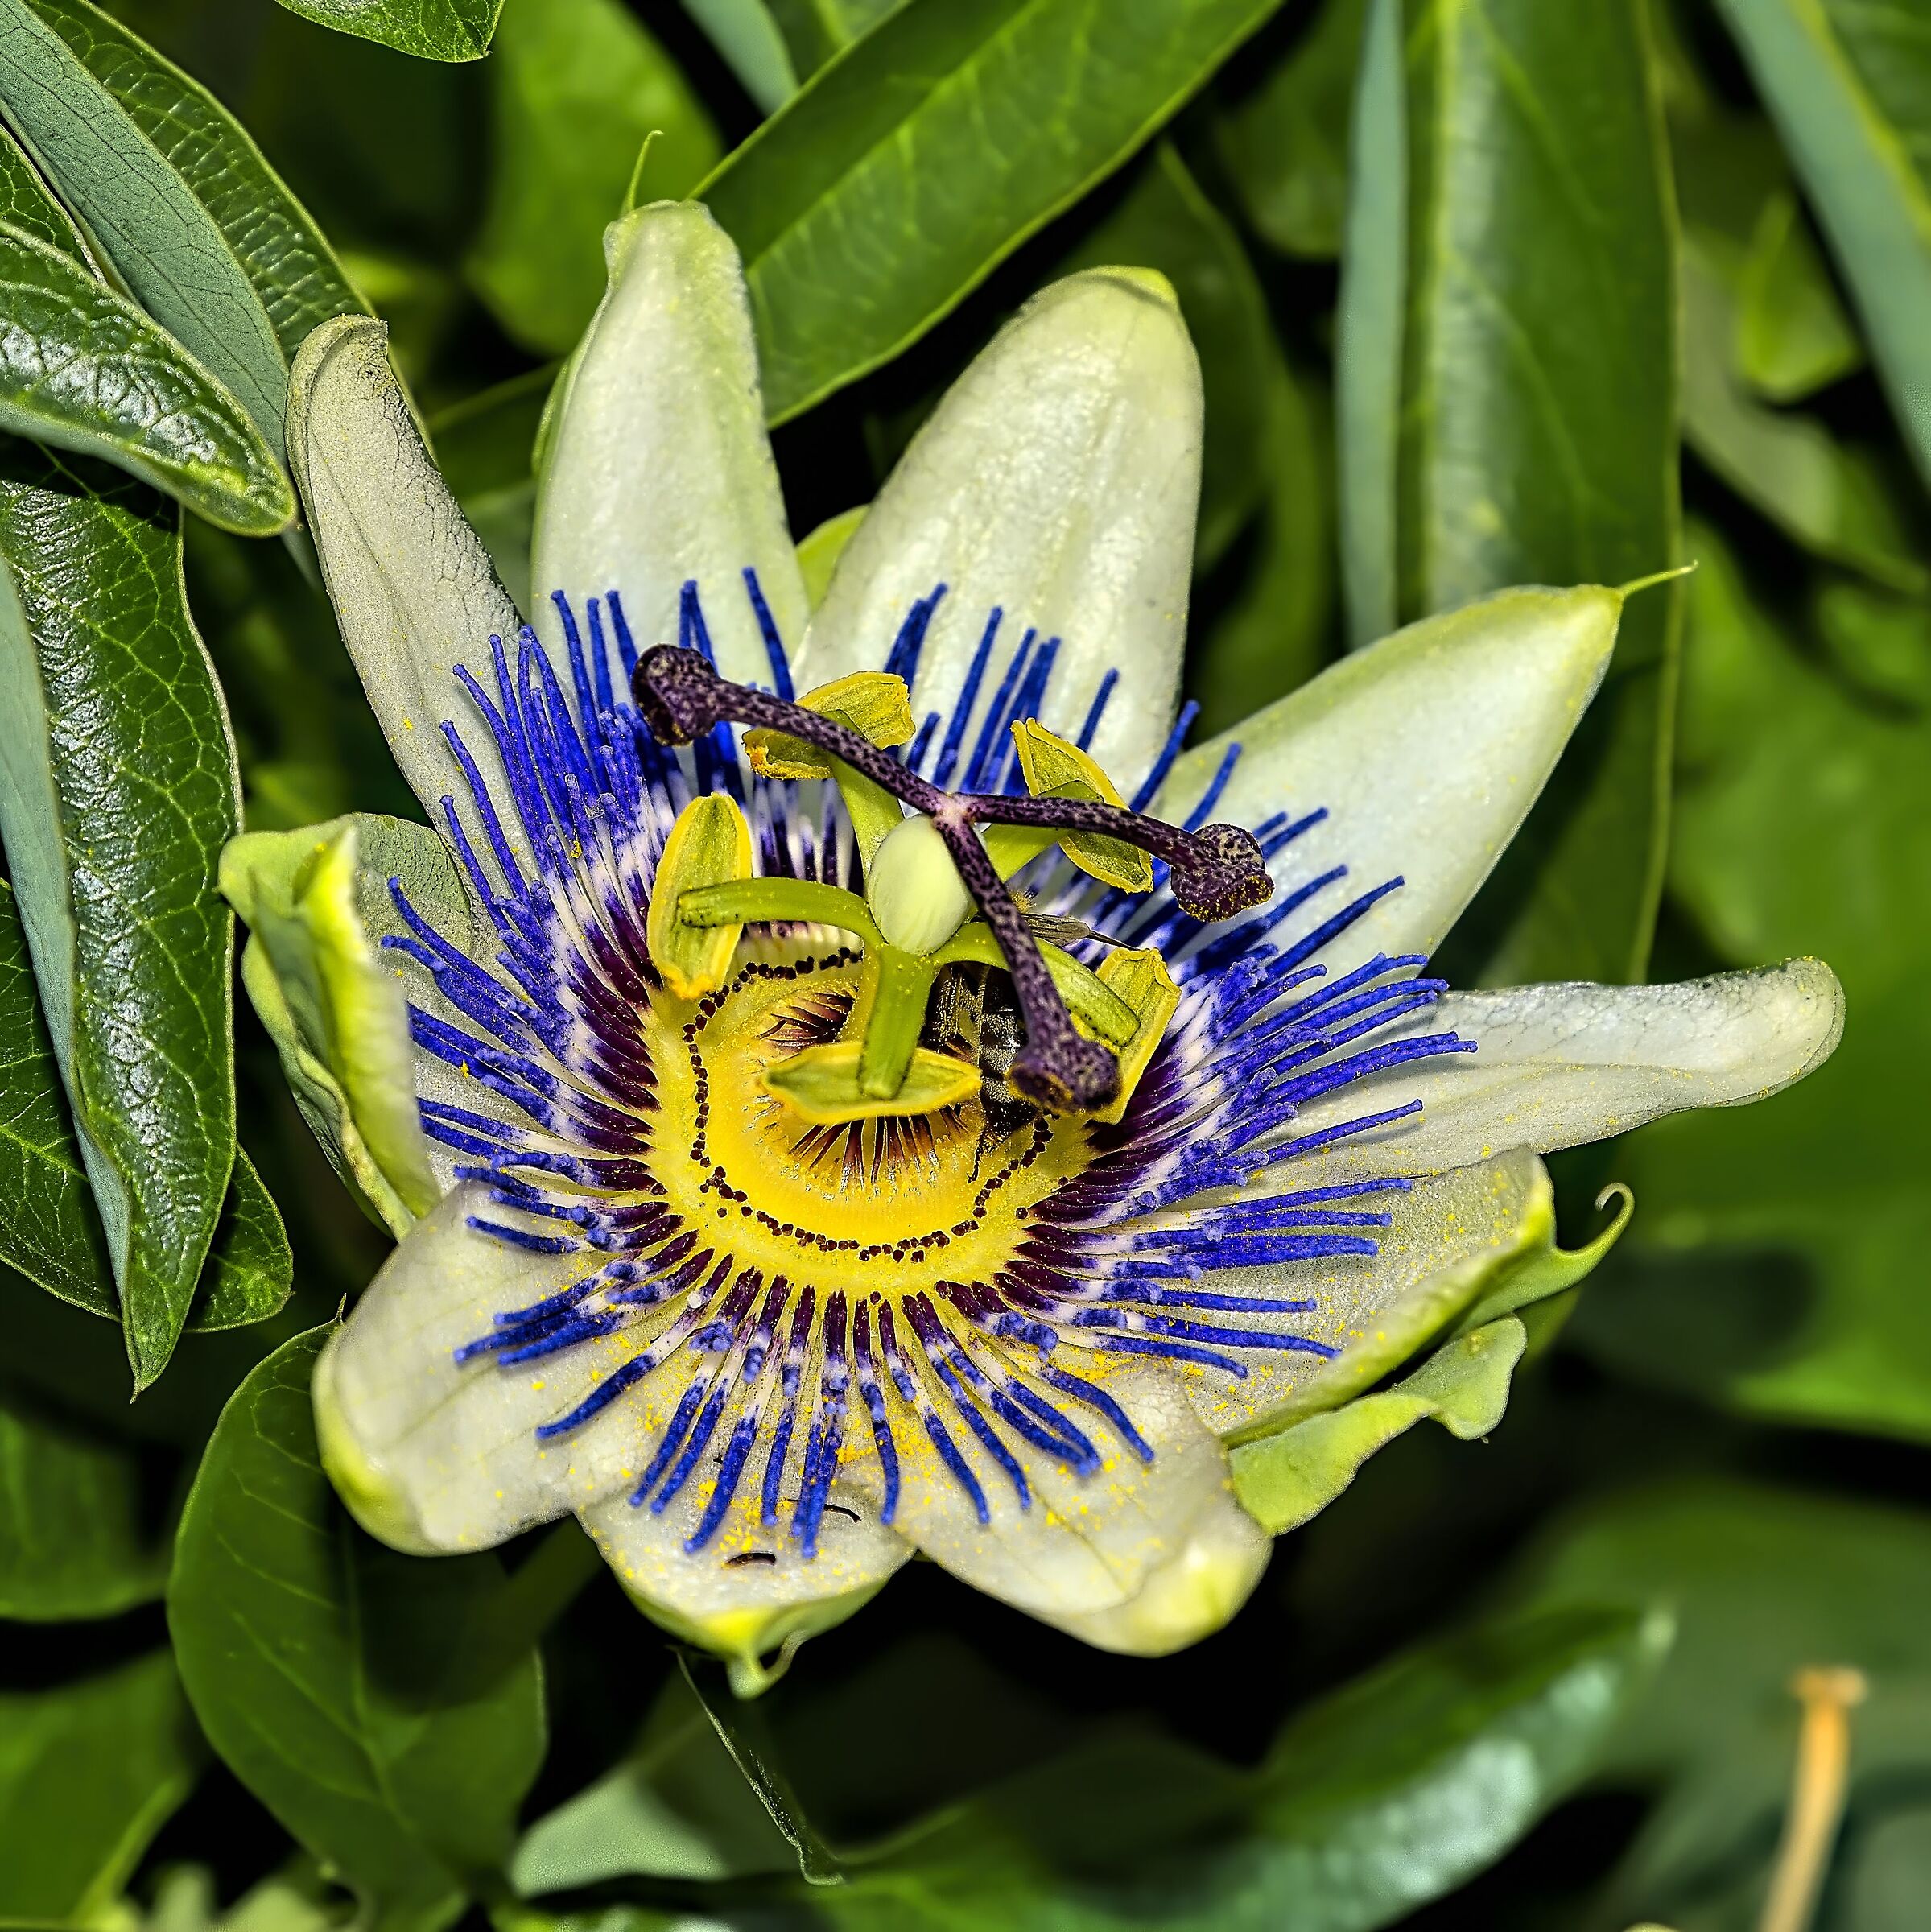 Passionflower - A complex flower...